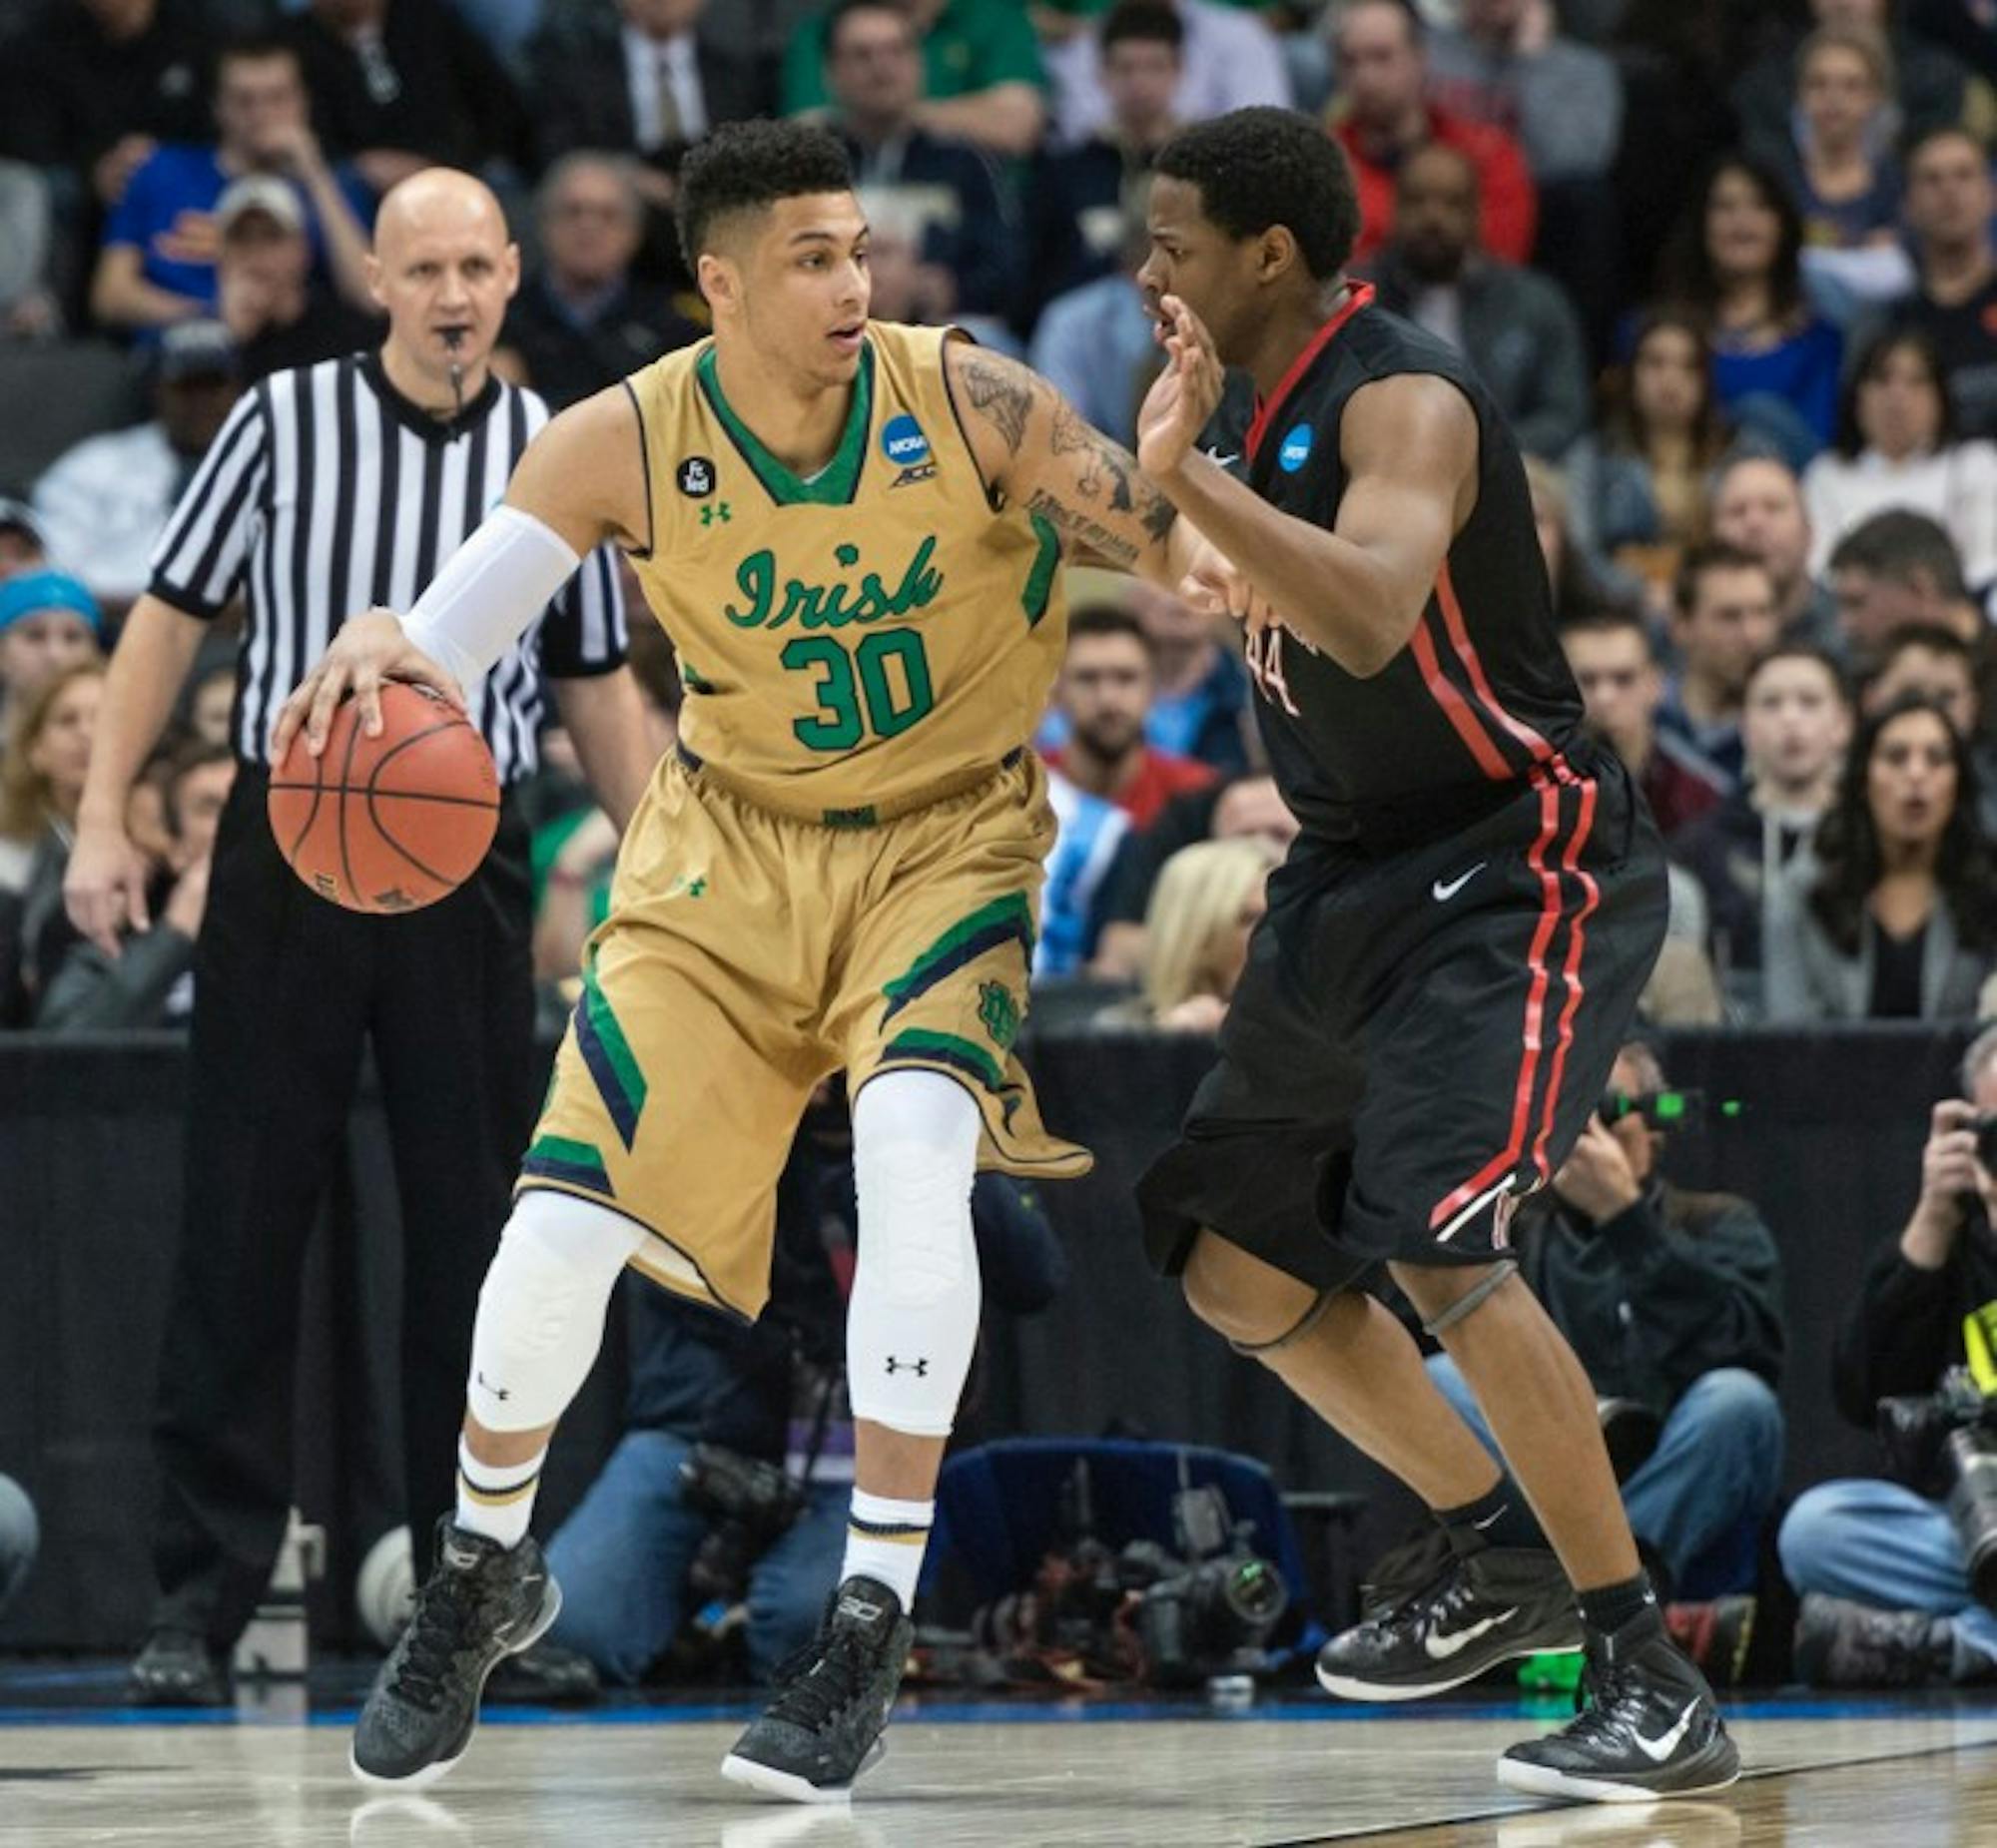 Irish junior forward Zach Auguste dribbles into the post against a defender during Notre Dame’s 69-65 win over Northeastern at CONSOL Energy Center in Pittsburgh on Thursday.